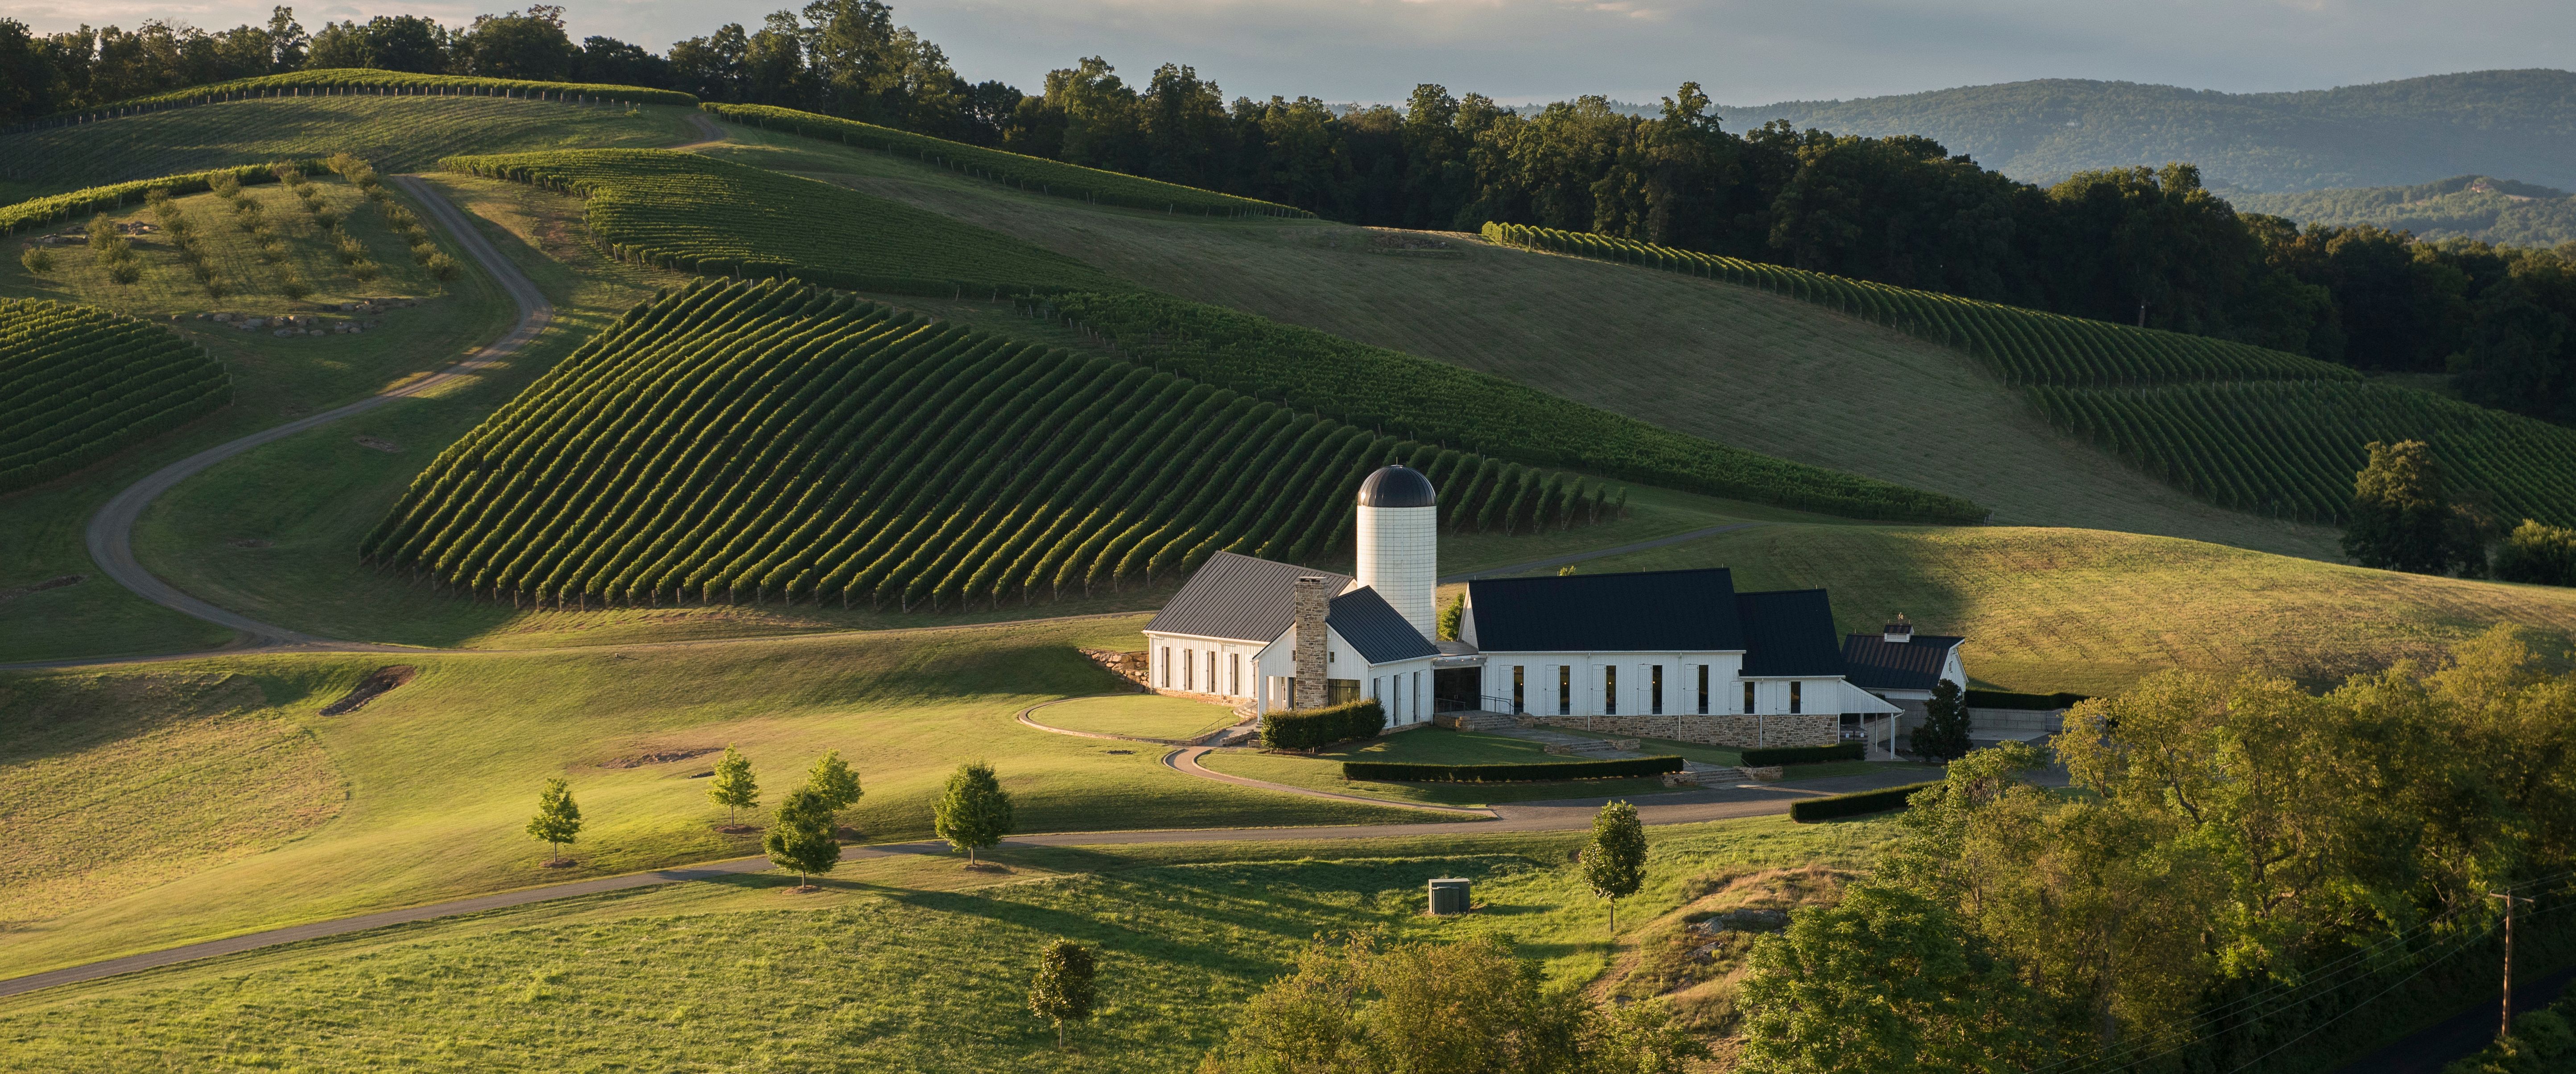 A photo of The Best Wine Tasting Tours in Virginia & Shenandoah Valley